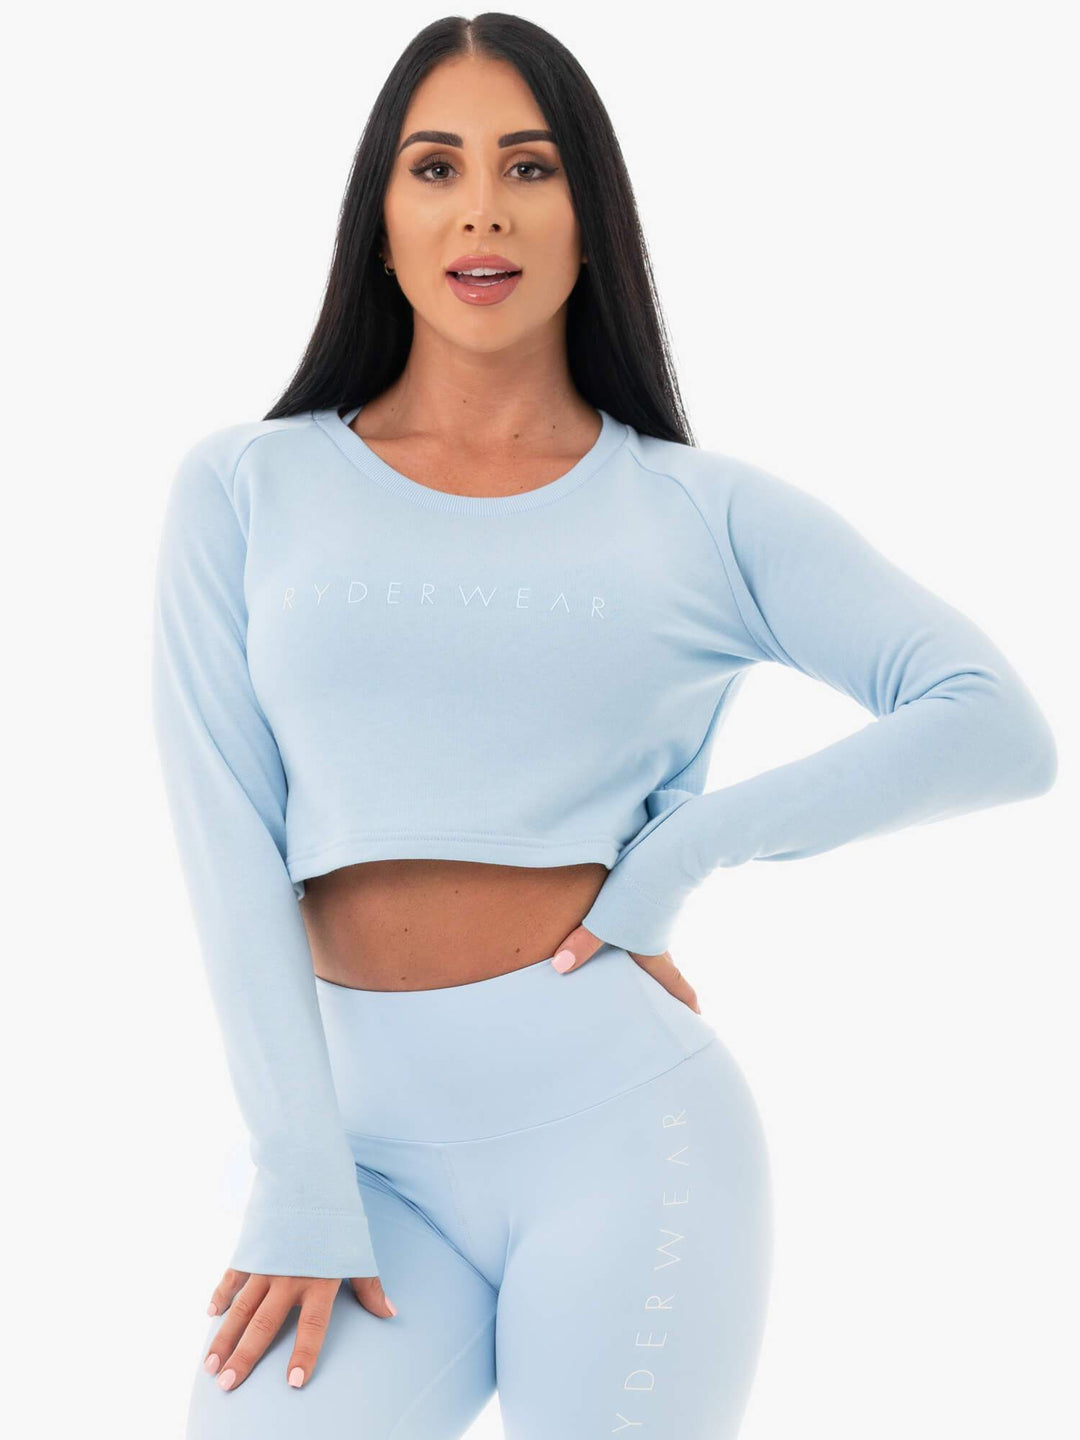 Staples Cropped Sweater - Sky Blue Clothing Ryderwear 